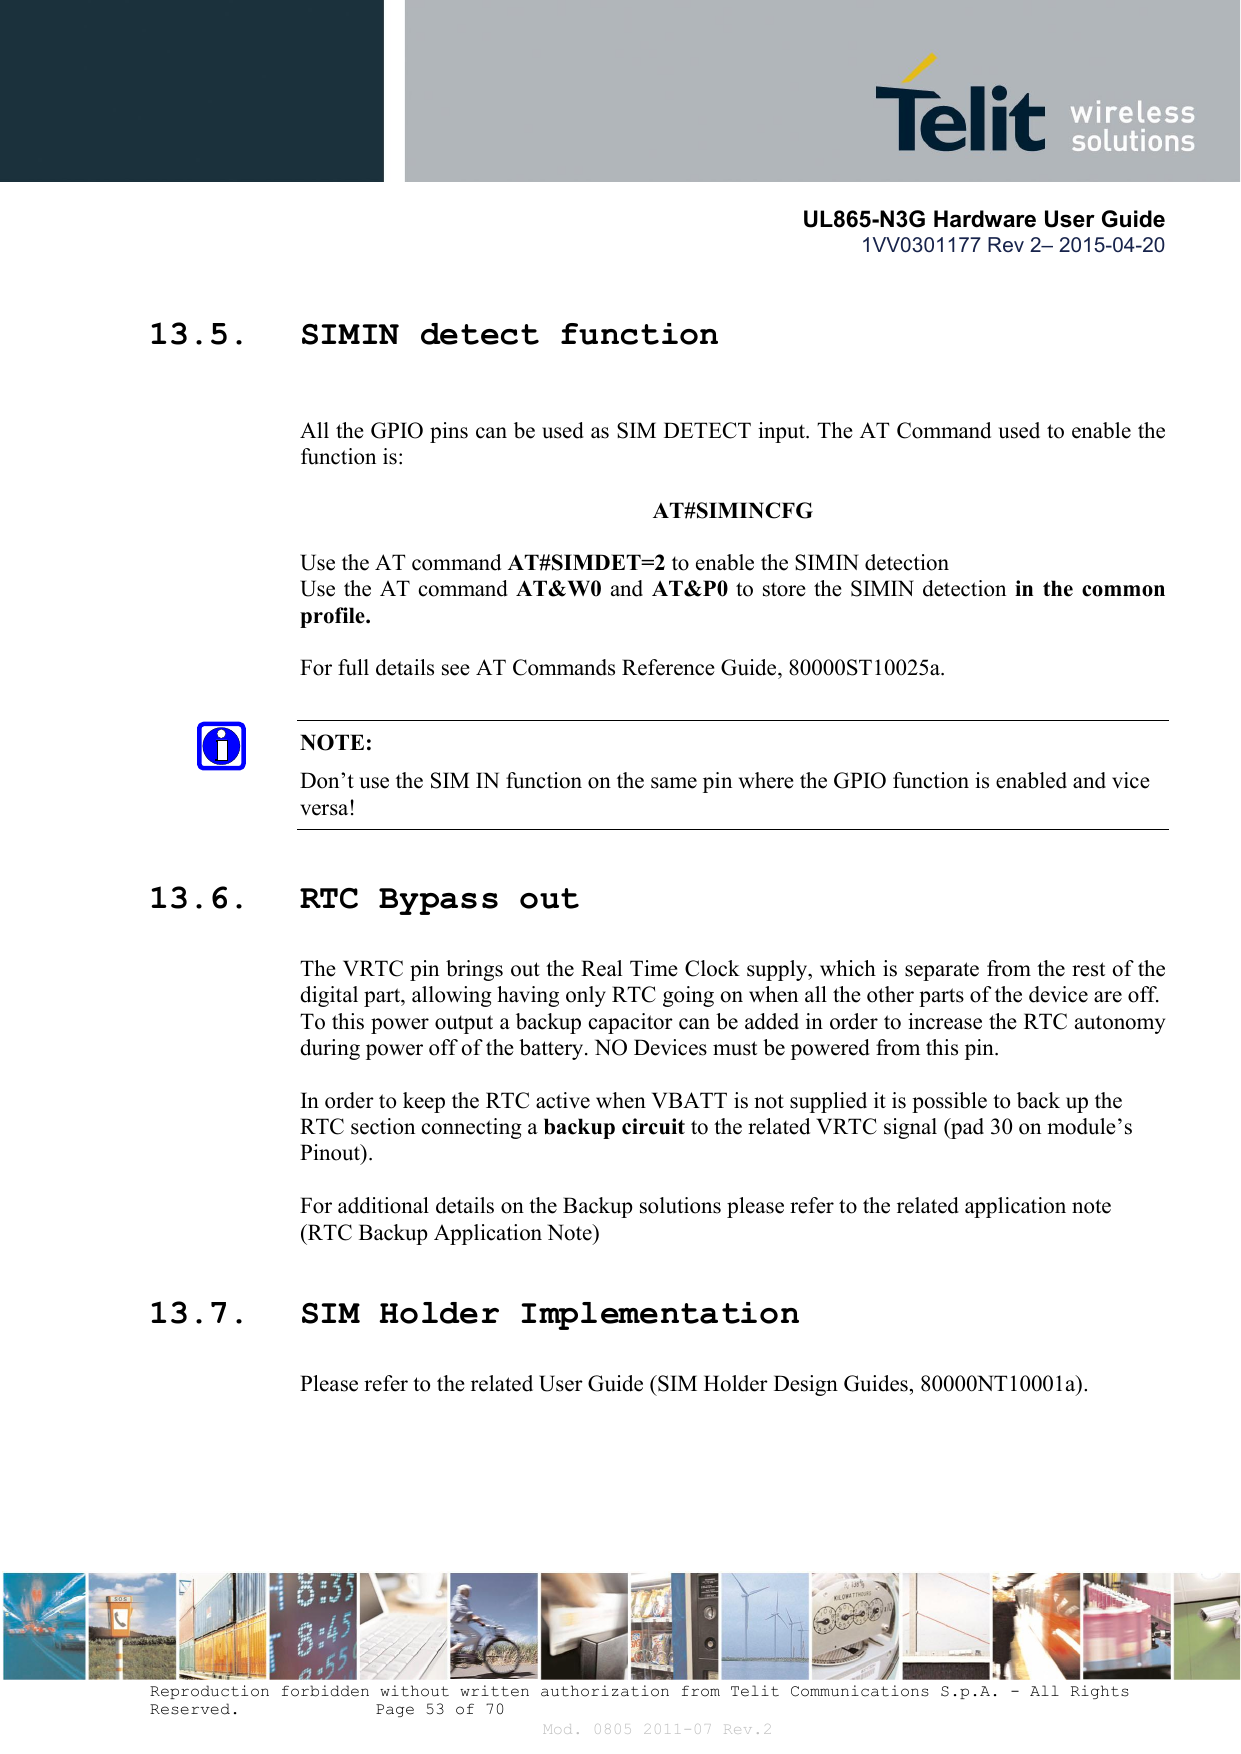       UL865-N3G Hardware User Guide 1VV0301177 Rev 2– 2015-04-20  Reproduction forbidden without written authorization from Telit Communications S.p.A. - All Rights Reserved.    Page 53 of 70 Mod. 0805 2011-07 Rev.2 13.5. SIMIN detect function  All the GPIO pins can be used as SIM DETECT input. The AT Command used to enable the function is:   AT#SIMINCFG  Use the AT command AT#SIMDET=2 to enable the SIMIN detection  Use the AT command AT&amp;W0  and  AT&amp;P0 to store the SIMIN detection  in  the  common profile.  For full details see AT Commands Reference Guide, 80000ST10025a.  NOTE: Don’t use the SIM IN function on the same pin where the GPIO function is enabled and vice versa! 13.6. RTC Bypass out The VRTC pin brings out the Real Time Clock supply, which is separate from the rest of the digital part, allowing having only RTC going on when all the other parts of the device are off. To this power output a backup capacitor can be added in order to increase the RTC autonomy during power off of the battery. NO Devices must be powered from this pin.  In order to keep the RTC active when VBATT is not supplied it is possible to back up the RTC section connecting a backup circuit to the related VRTC signal (pad 30 on module’s Pinout).  For additional details on the Backup solutions please refer to the related application note (RTC Backup Application Note) 13.7. SIM Holder Implementation Please refer to the related User Guide (SIM Holder Design Guides, 80000NT10001a).  